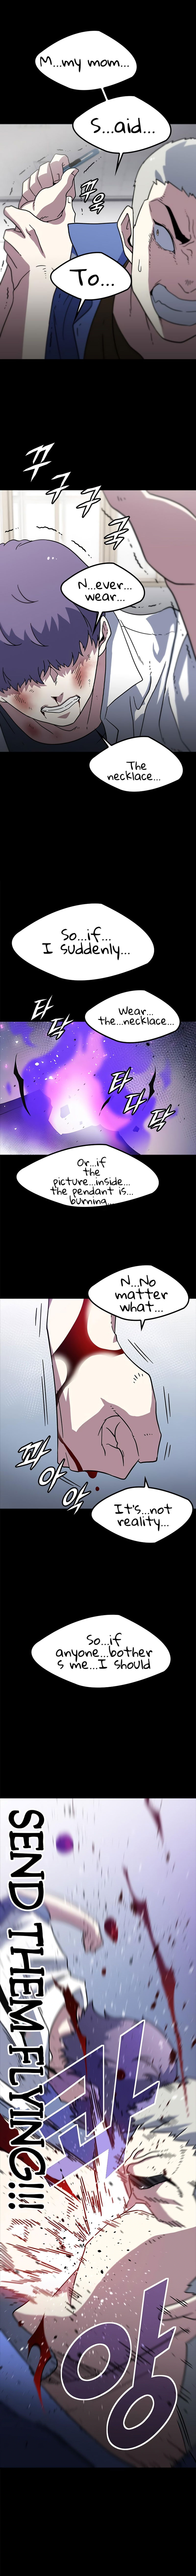 Hitpoint Chapter 8 page 15